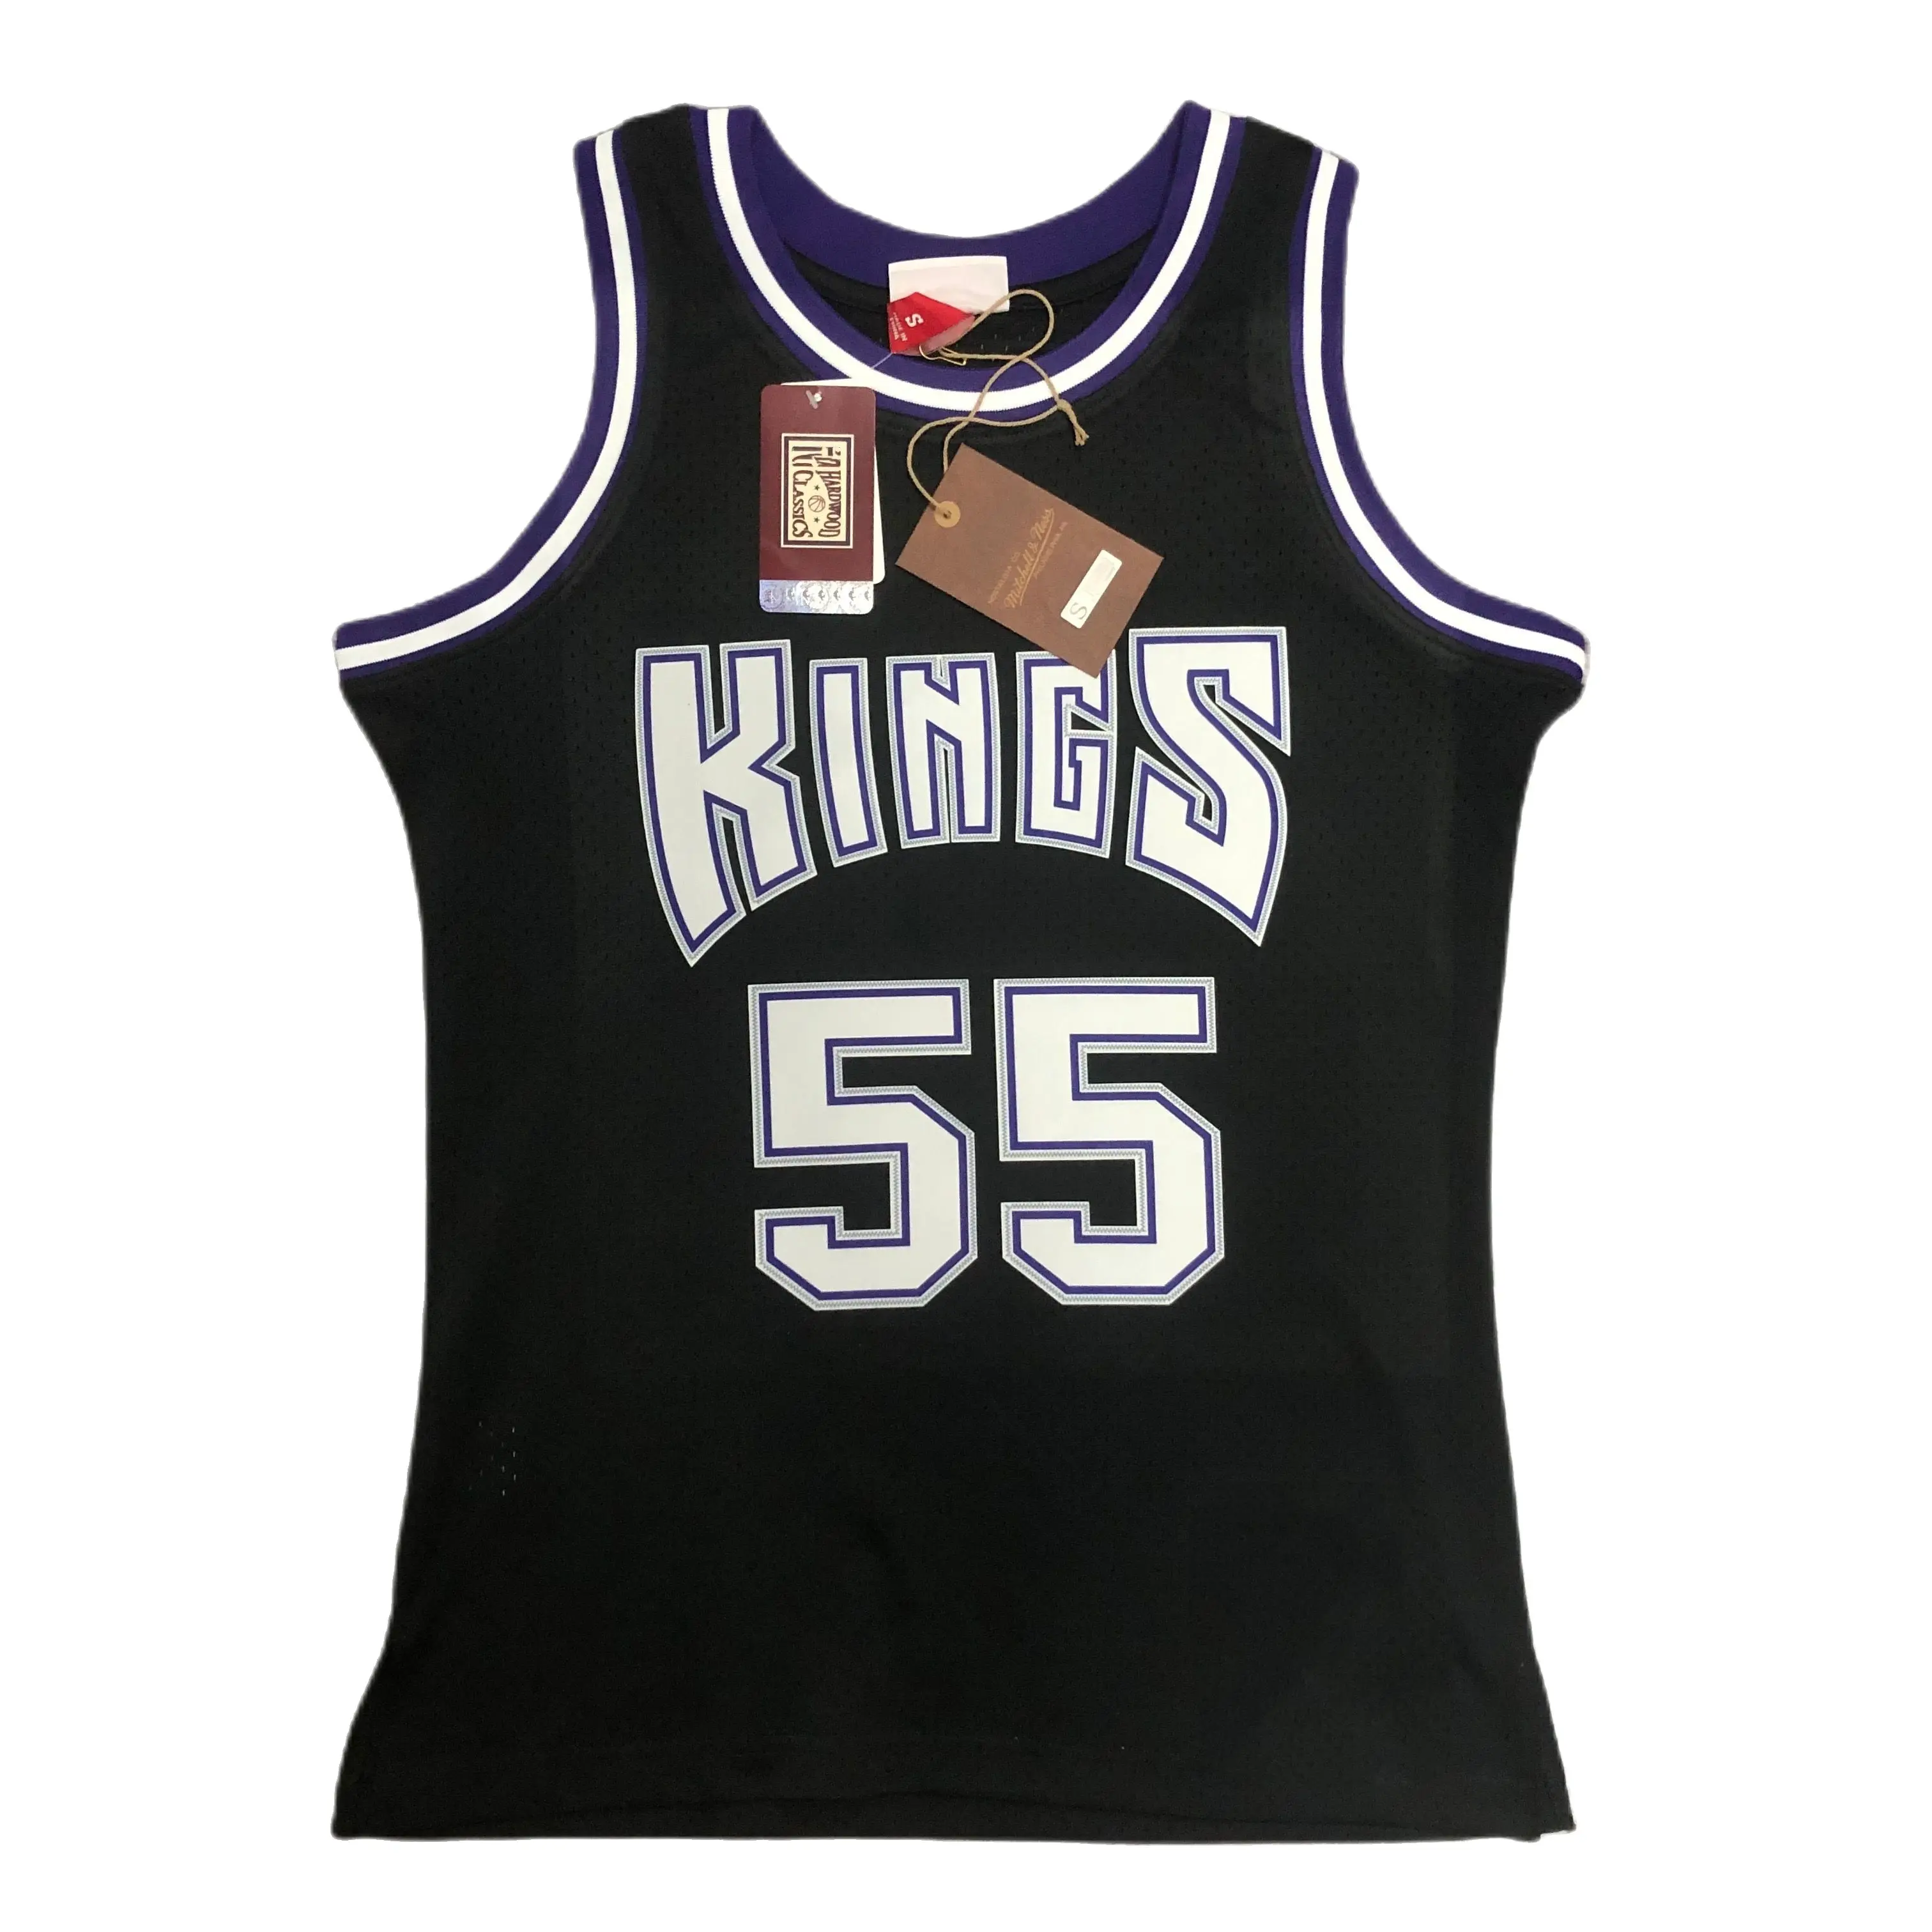 Over instelling informatie belegd broodje Wholesale Kings Season Jersey #55 Retro Trend Fashion Basketball Cooling  Vest Number Can Be Customized - Buy Blank Basketball Jersey,Workout Shorts  Men,King William Jersey Product on Alibaba.com